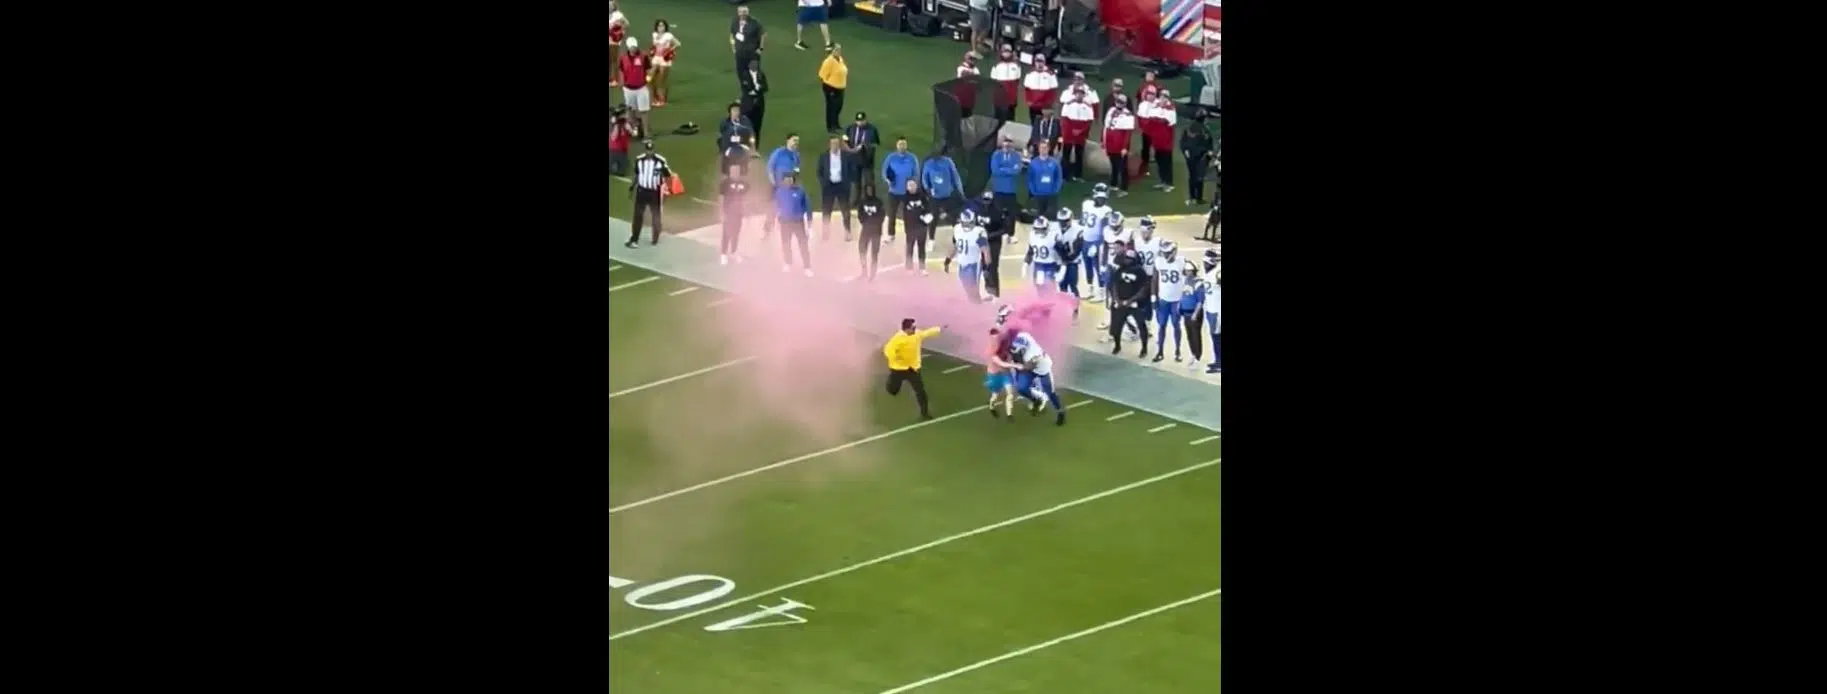 [WATCH] Man Runs On Field During NFL Game And Gets Destroyed